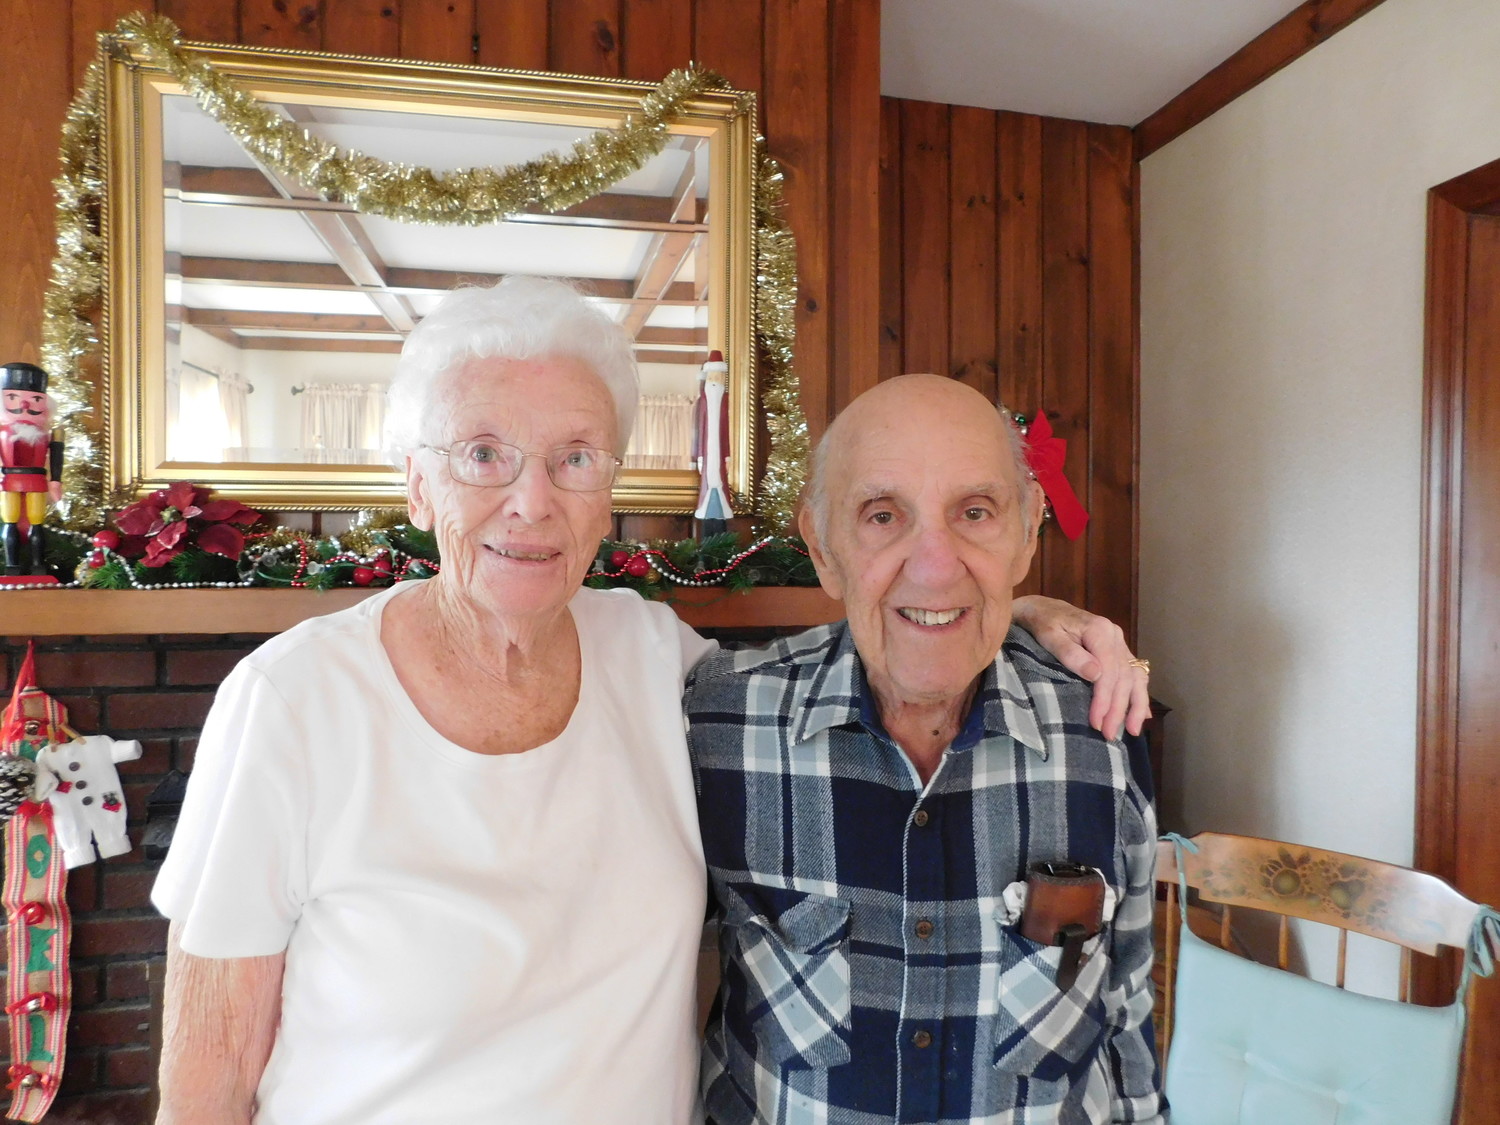 Gloria and Charlie Chapman, 92- and 91-year-old volunteers and world travelers, are the Herald Life’s 2017 People of the Year.